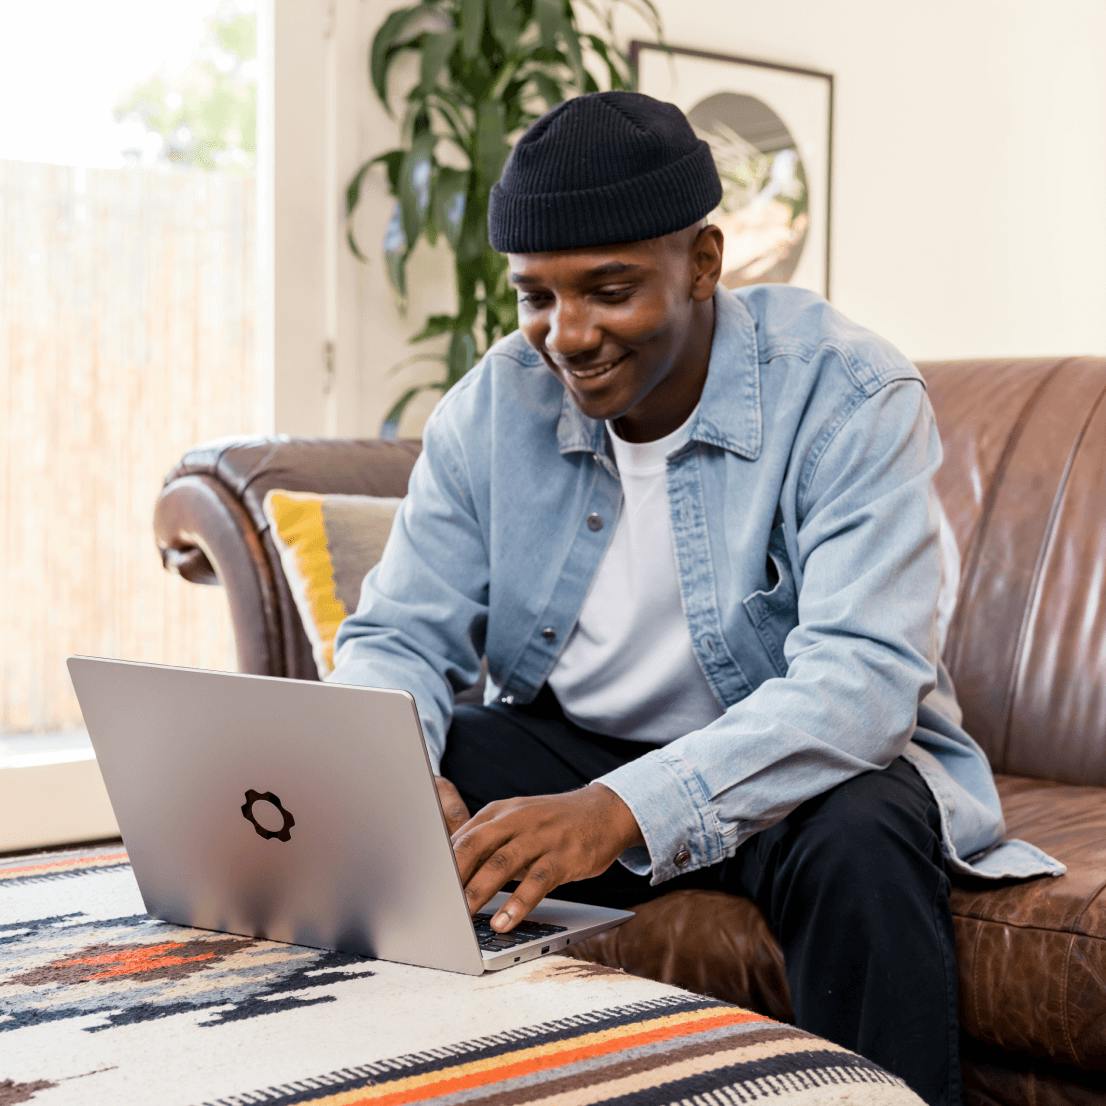 A man using a Framework Laptop on couch